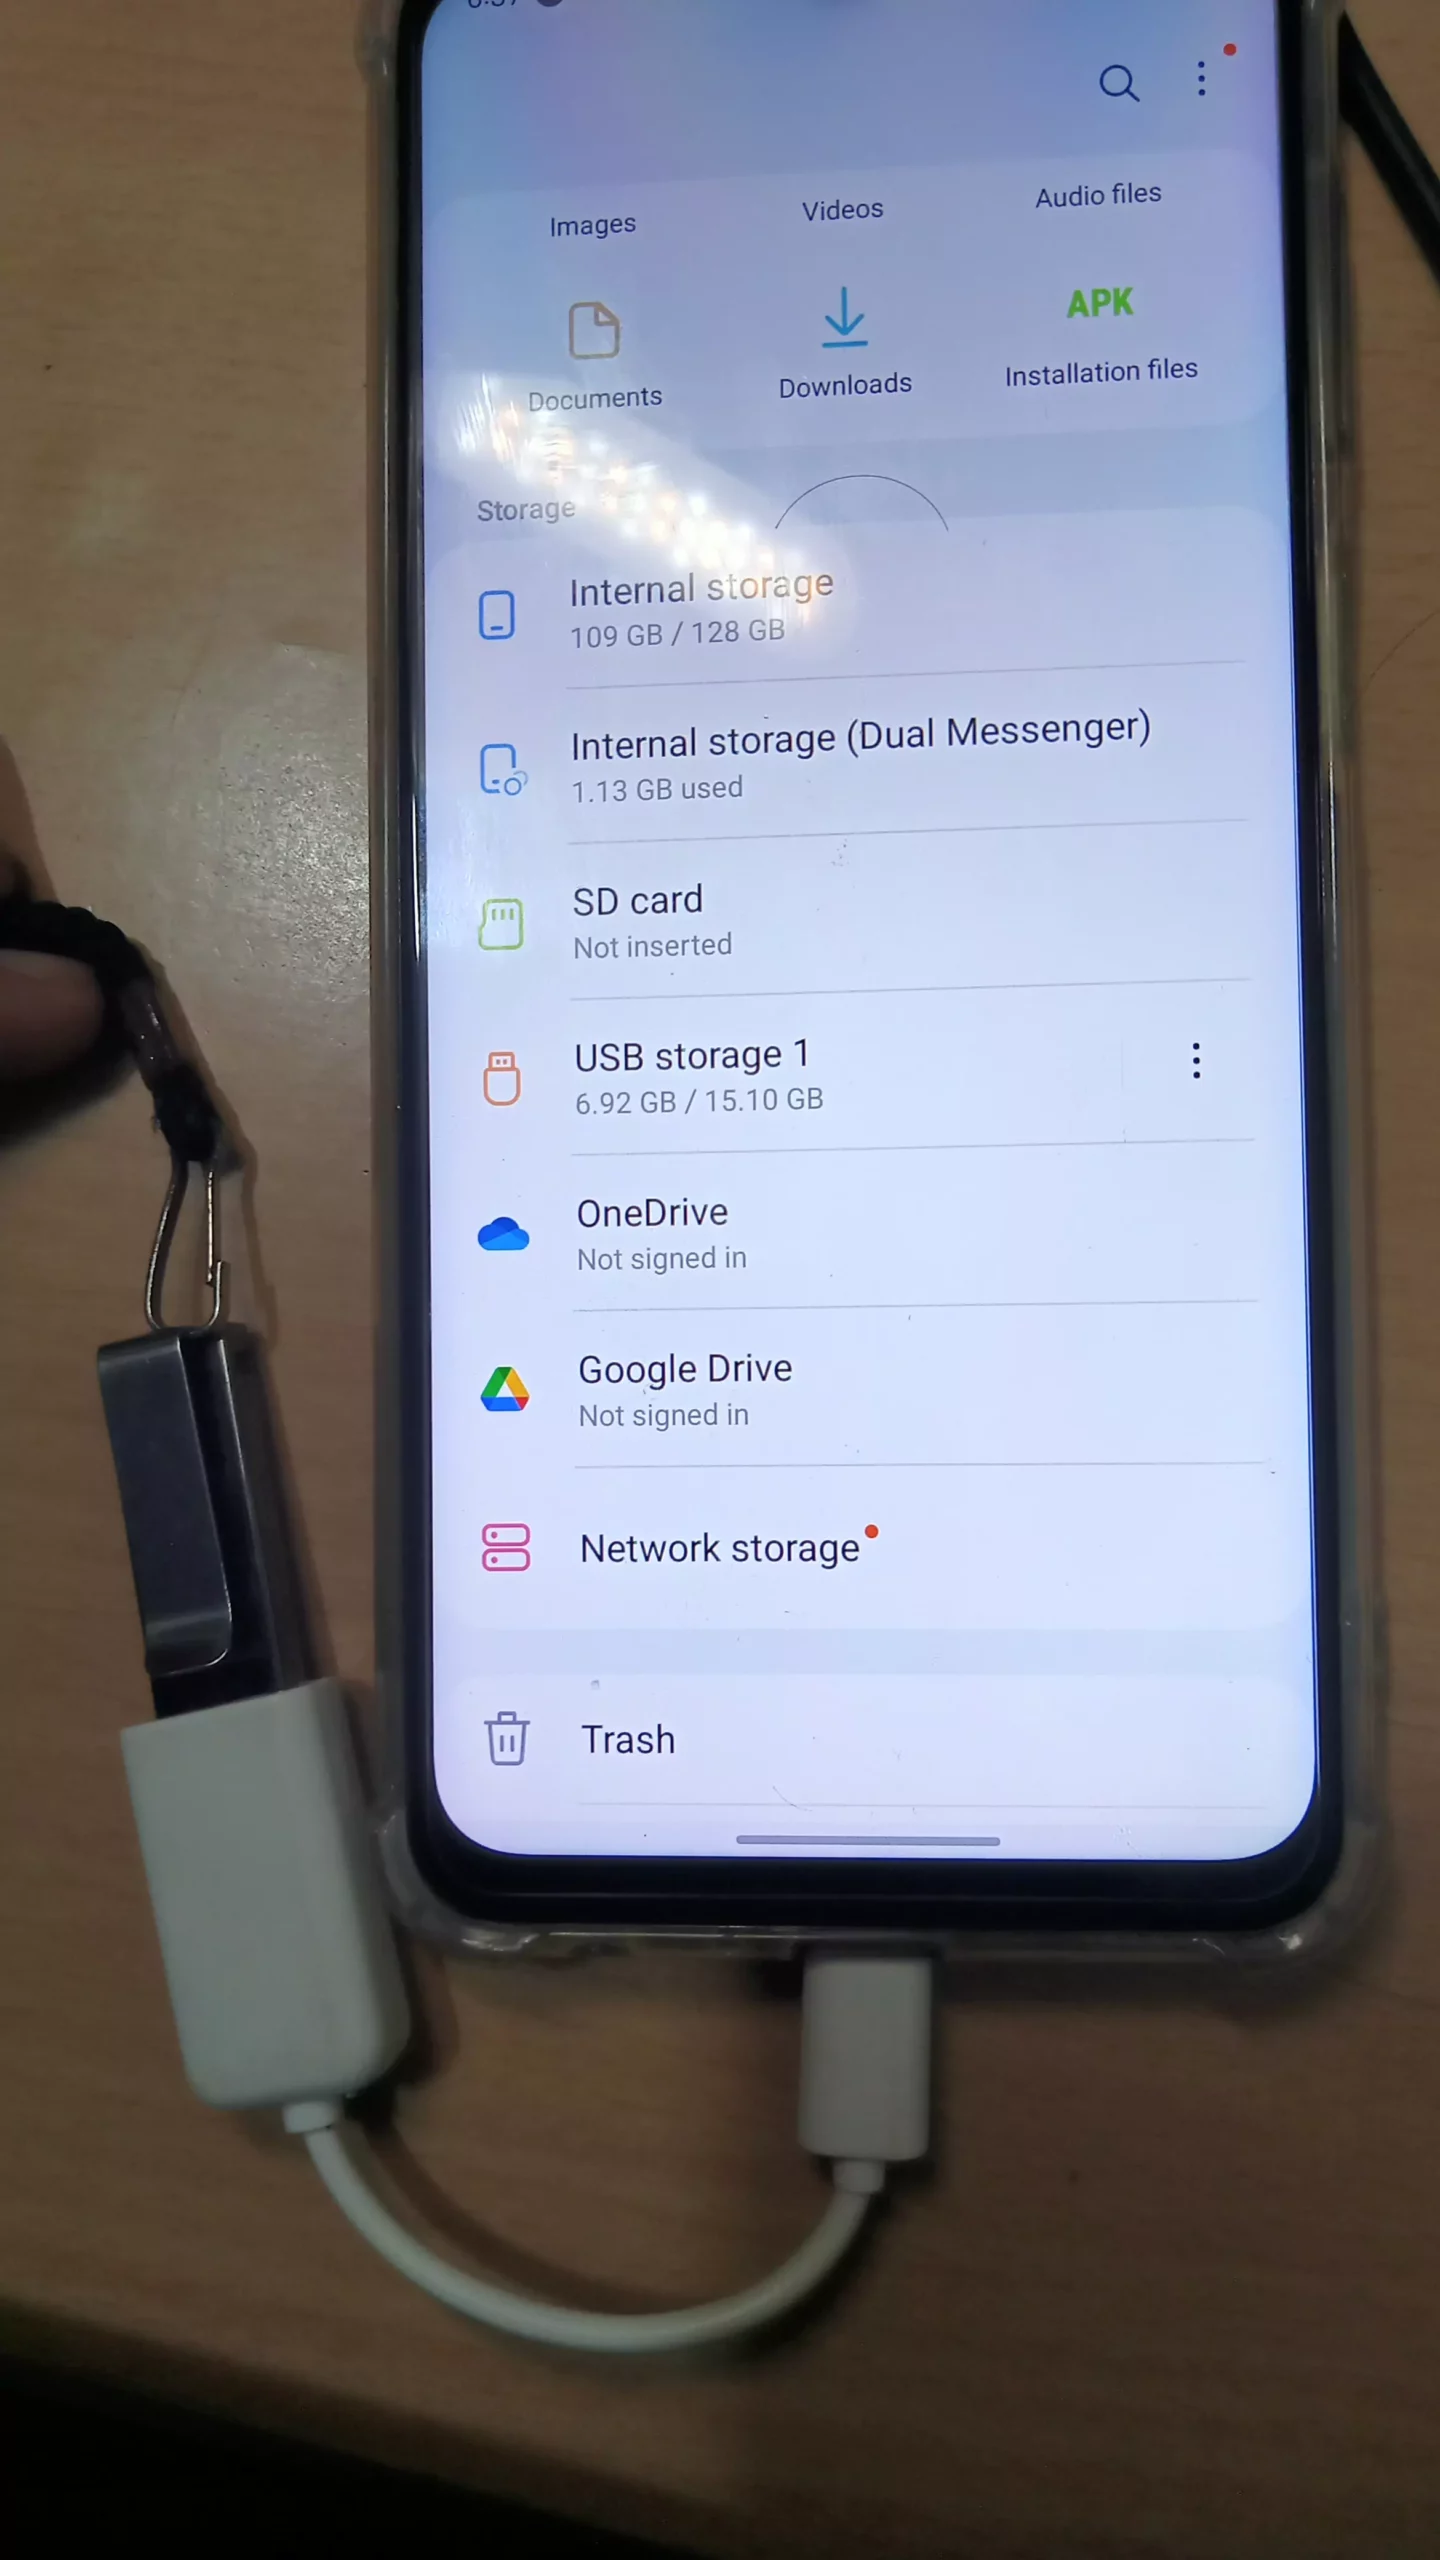 usb pendrive connected on samsung shown in the image with otg